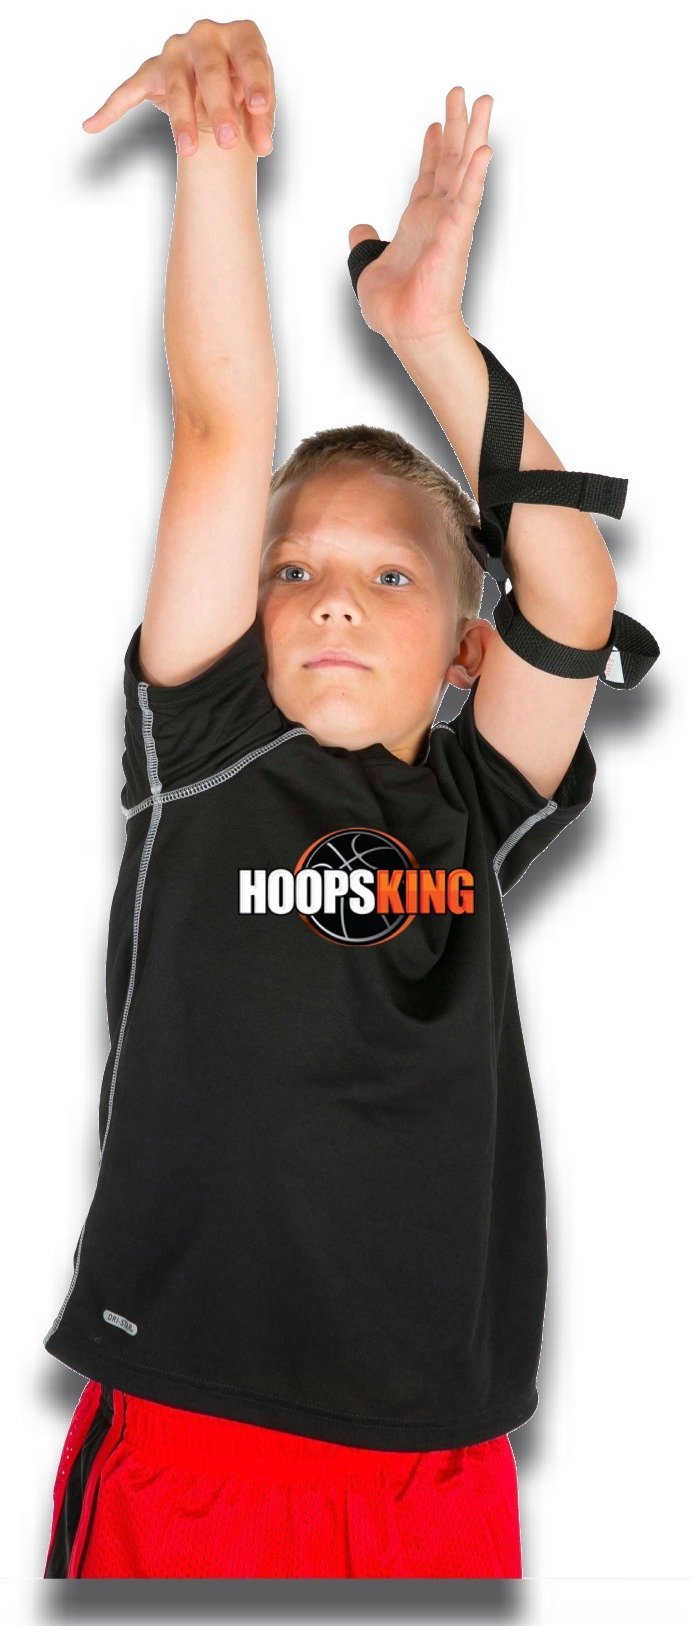 HoopsKing Off or Guide Hand Shooting Aid Perfect Jump Shot Strap - Develop A True One Handed Release On Your Shot - Stops Rotation of The Wrist to Prevent Off Hand Interference - BeesActive Australia